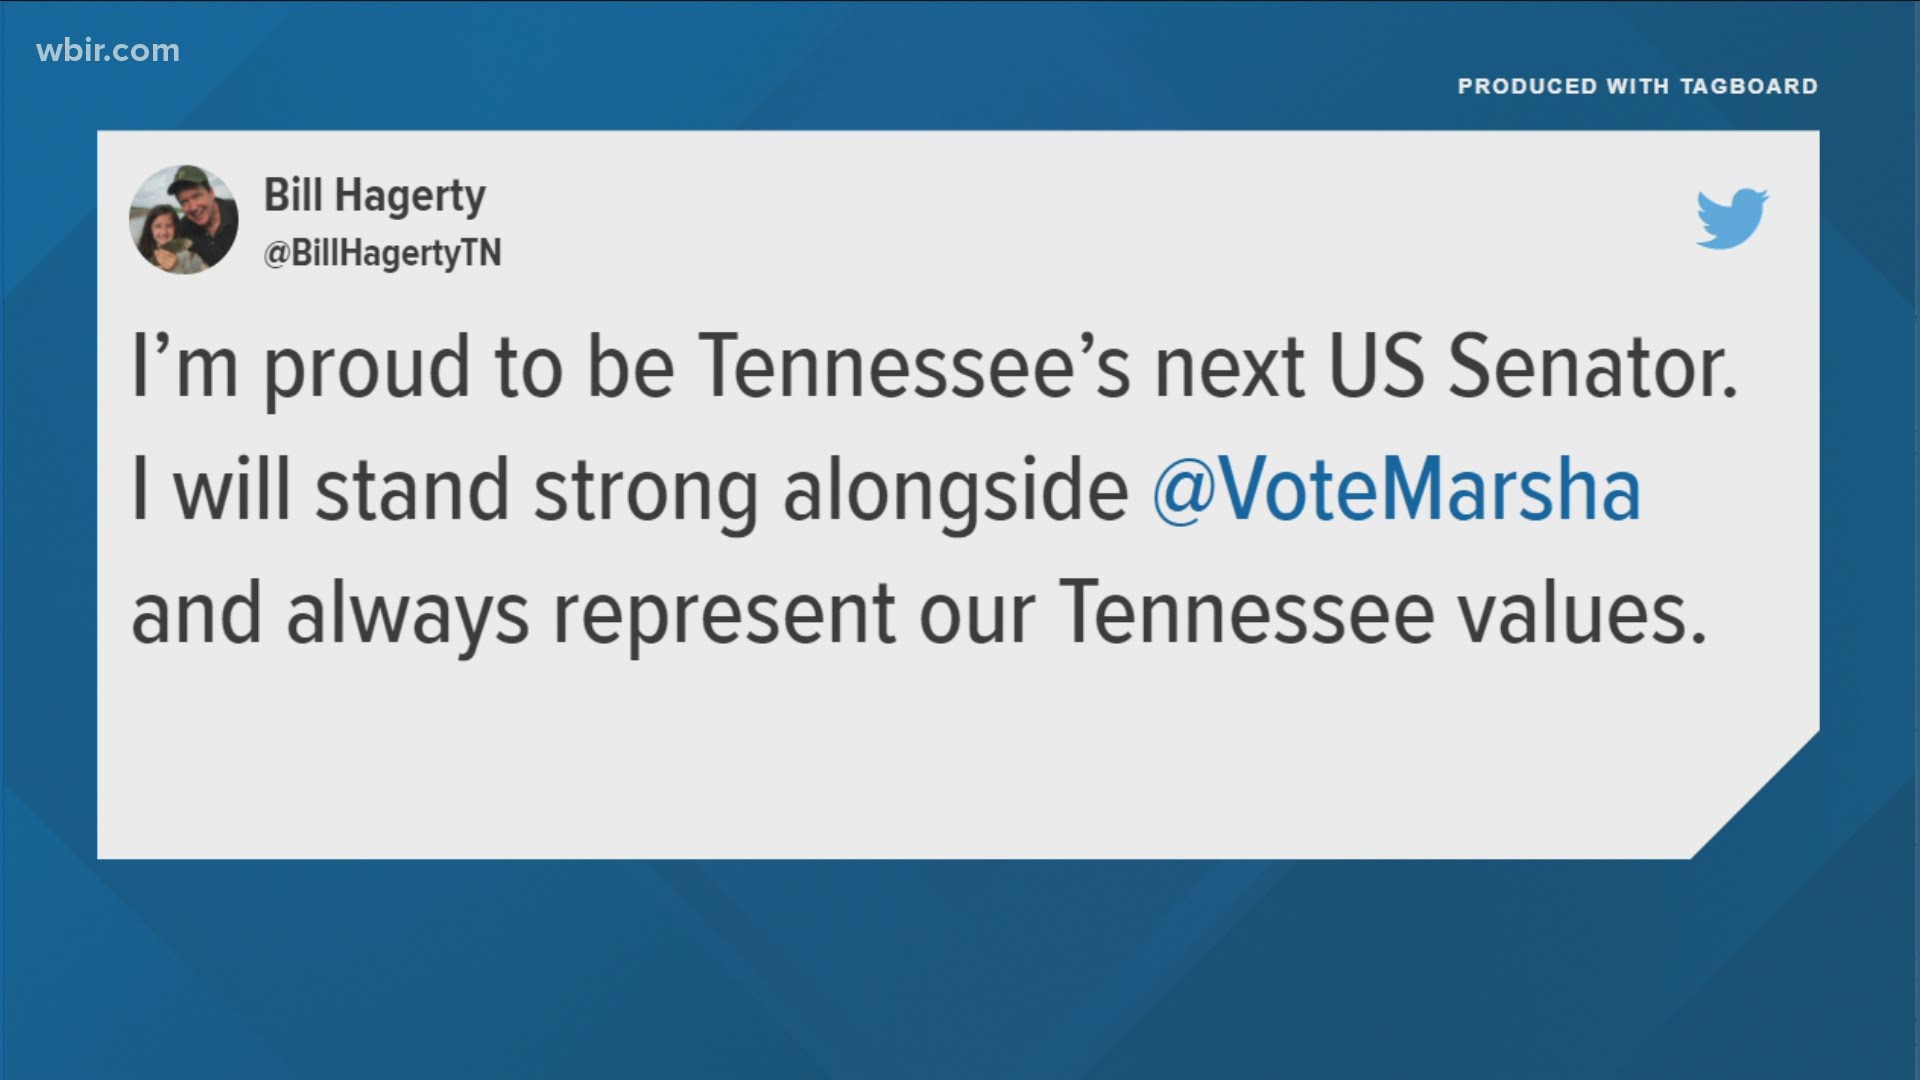 He tweeted that he is proud and will stand alongside Senator Marsha Blackburn and always represent Tennessee's values.